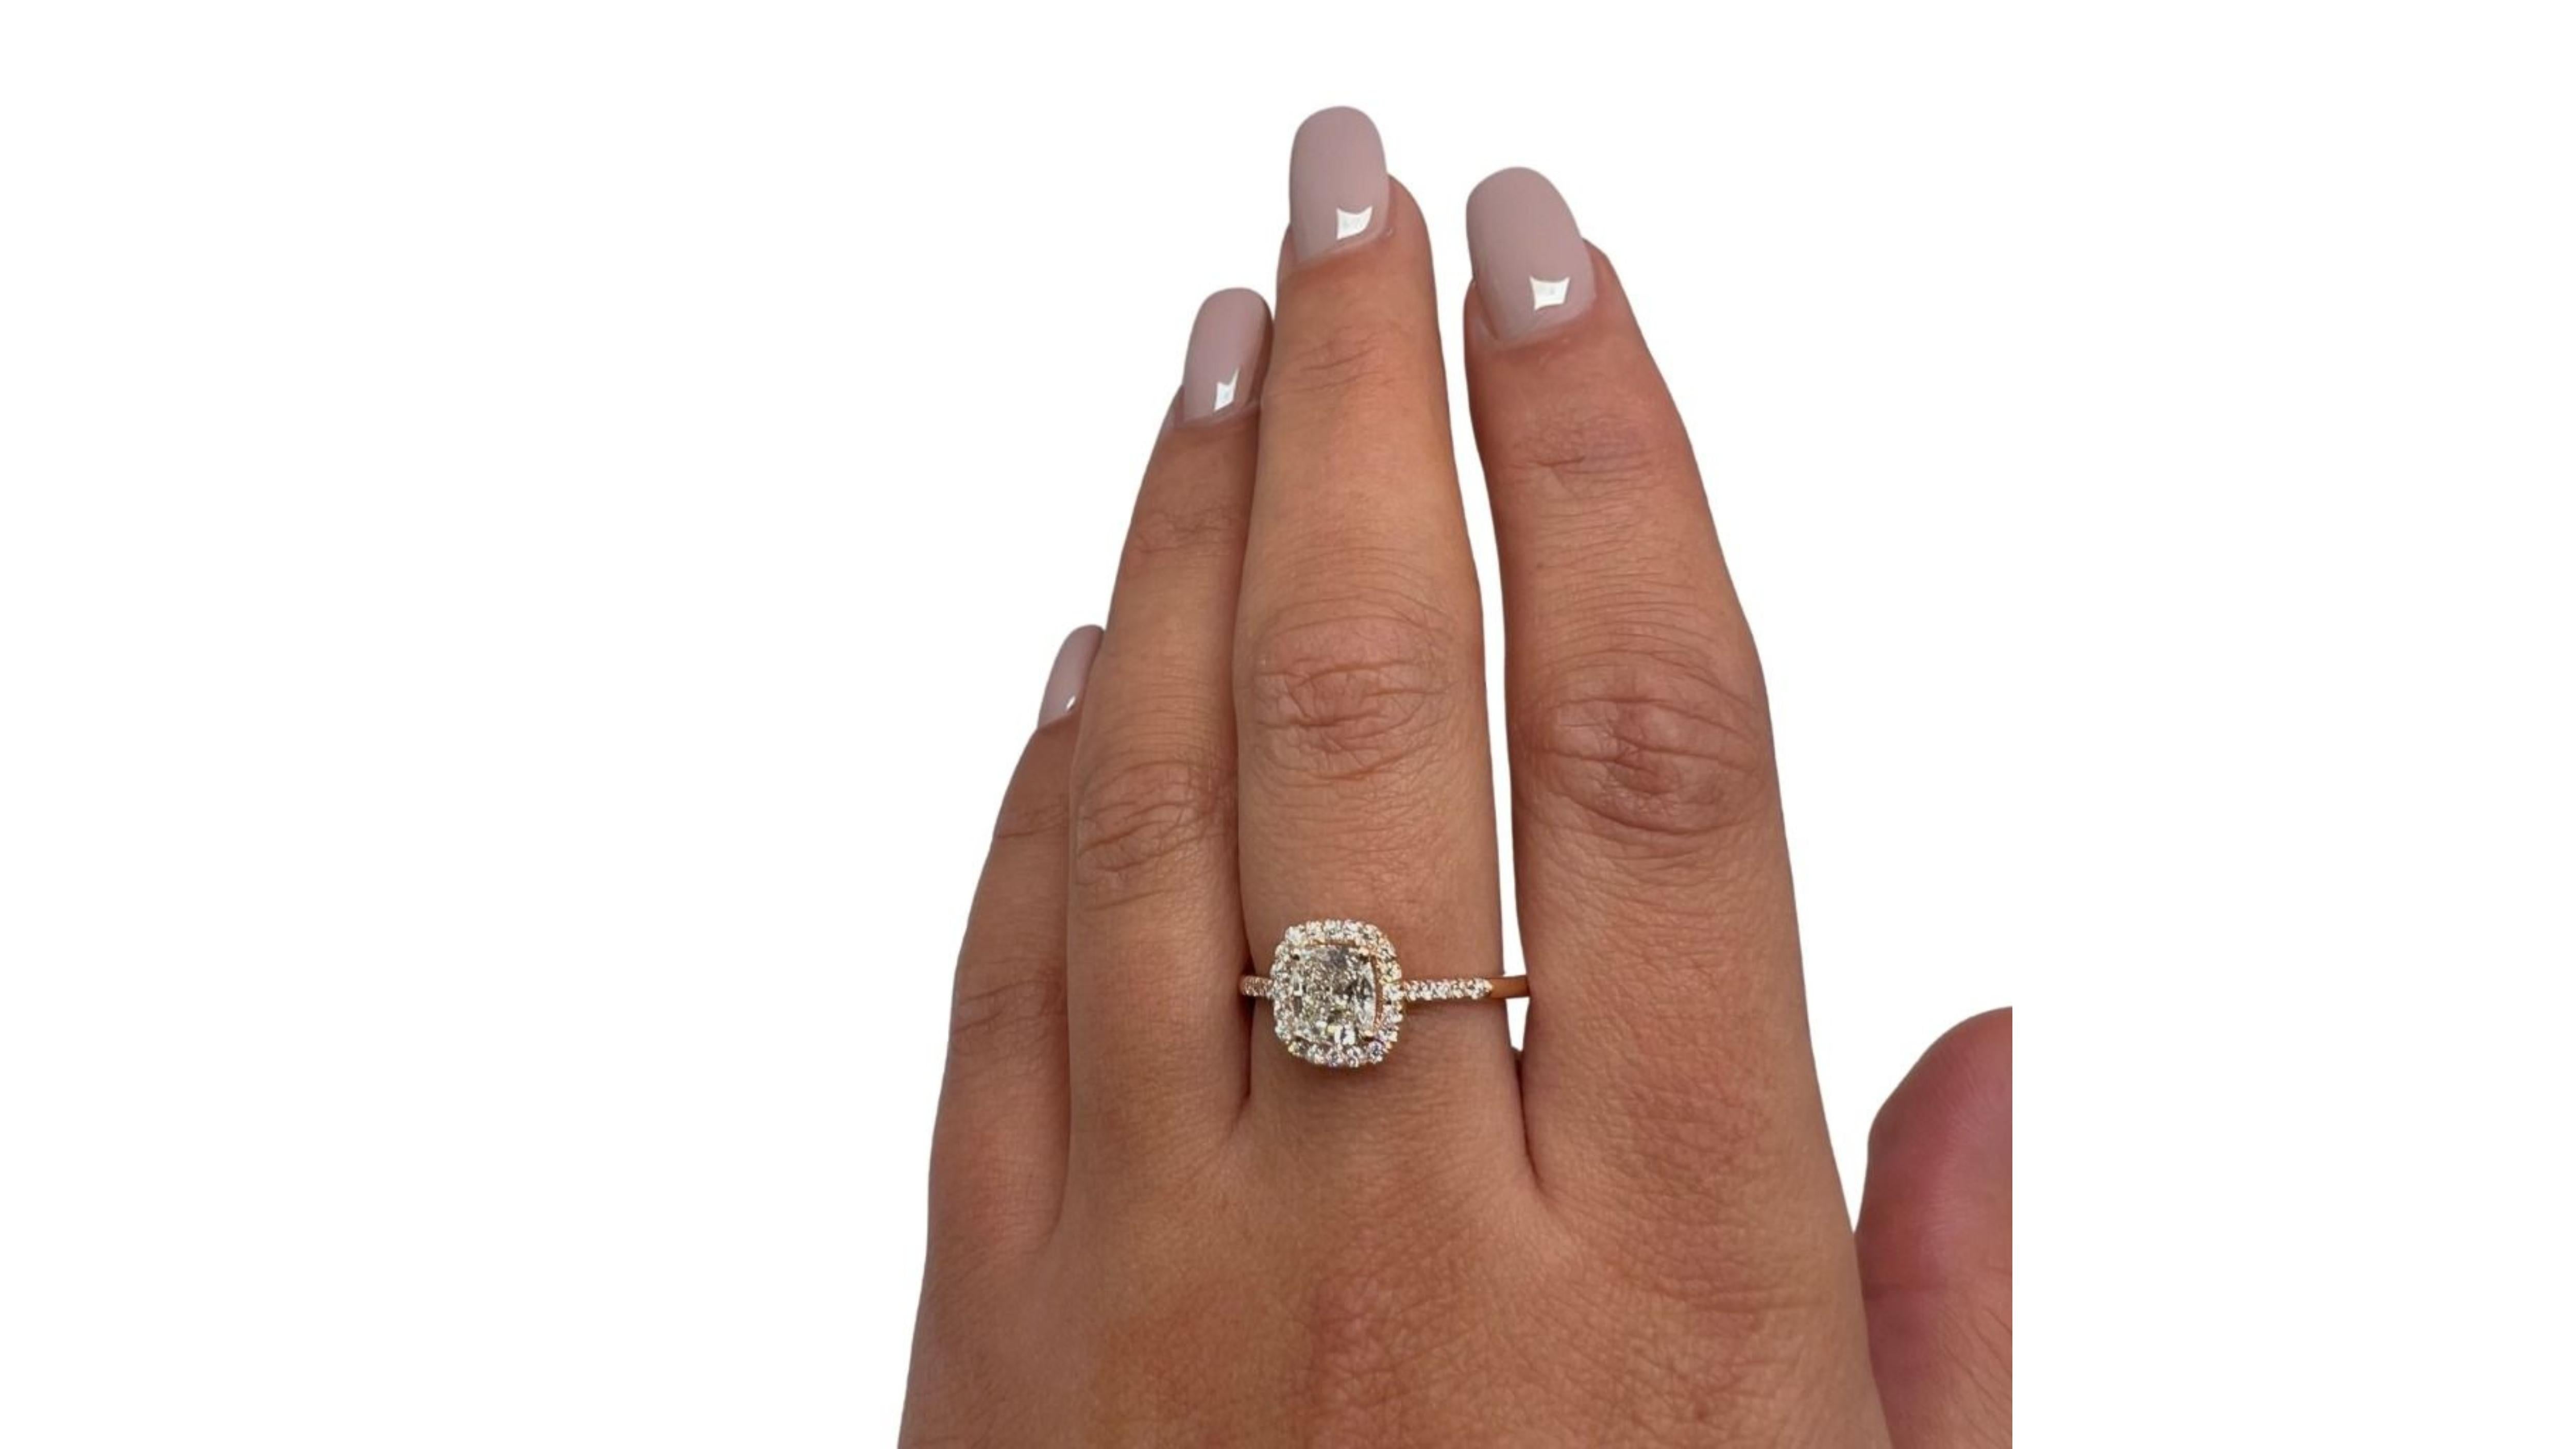 The ring is in excellent condition and comes with an IGI certificate and a nice jewelry box. It is also adjustable for up to 3 sizes, making it a perfect fit for any finger.

1 Diamond main stone of 1 carat
Cut: cushion shape
Color: H-I
Clarity: VS